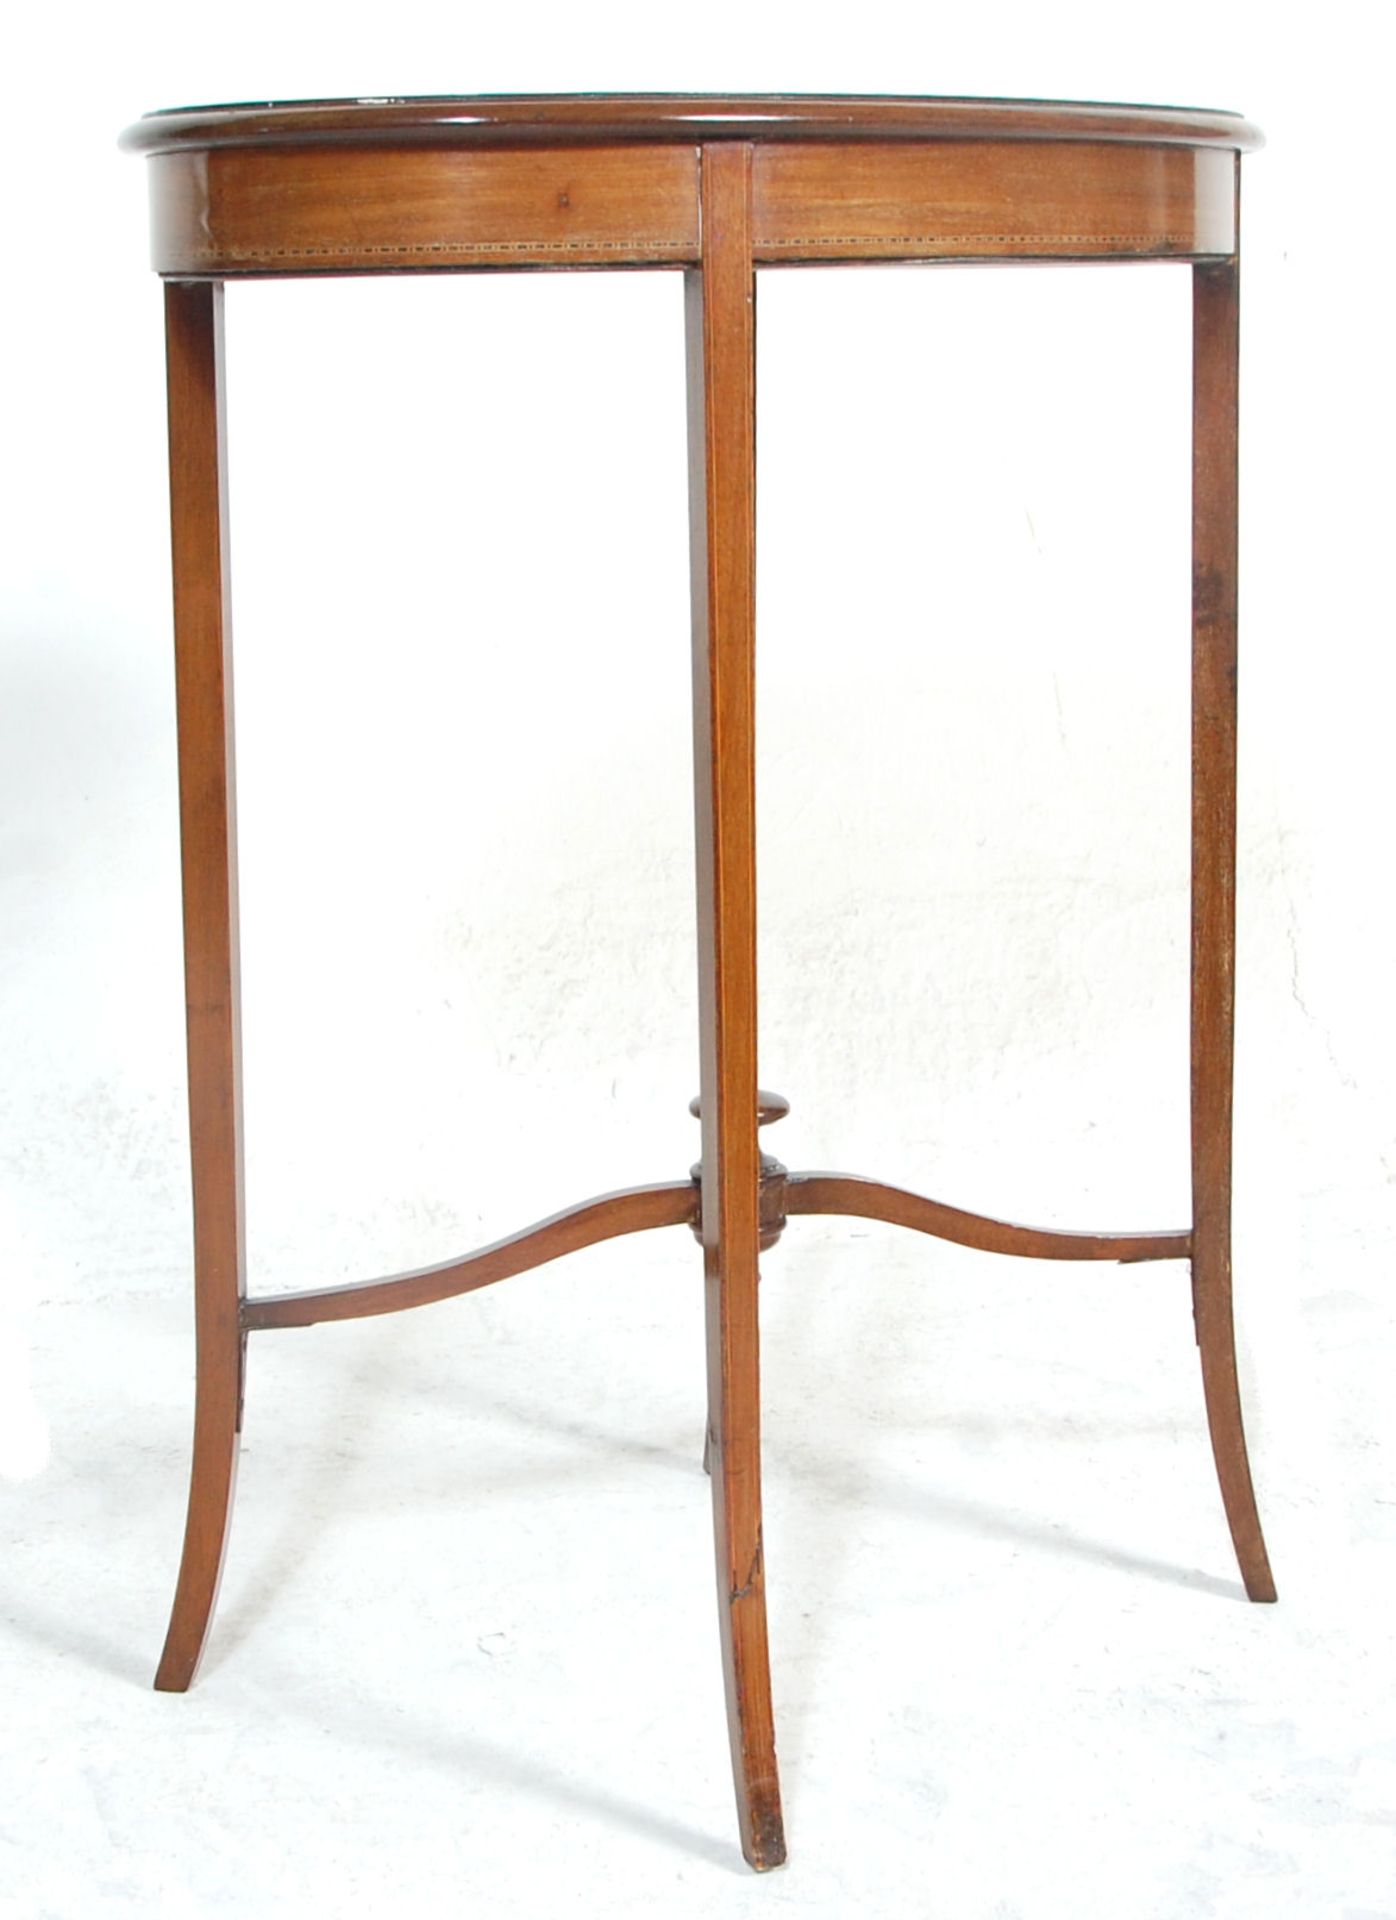 An Edwardian mahogany hall side table having an oval top with a diamond veneer and satinwood